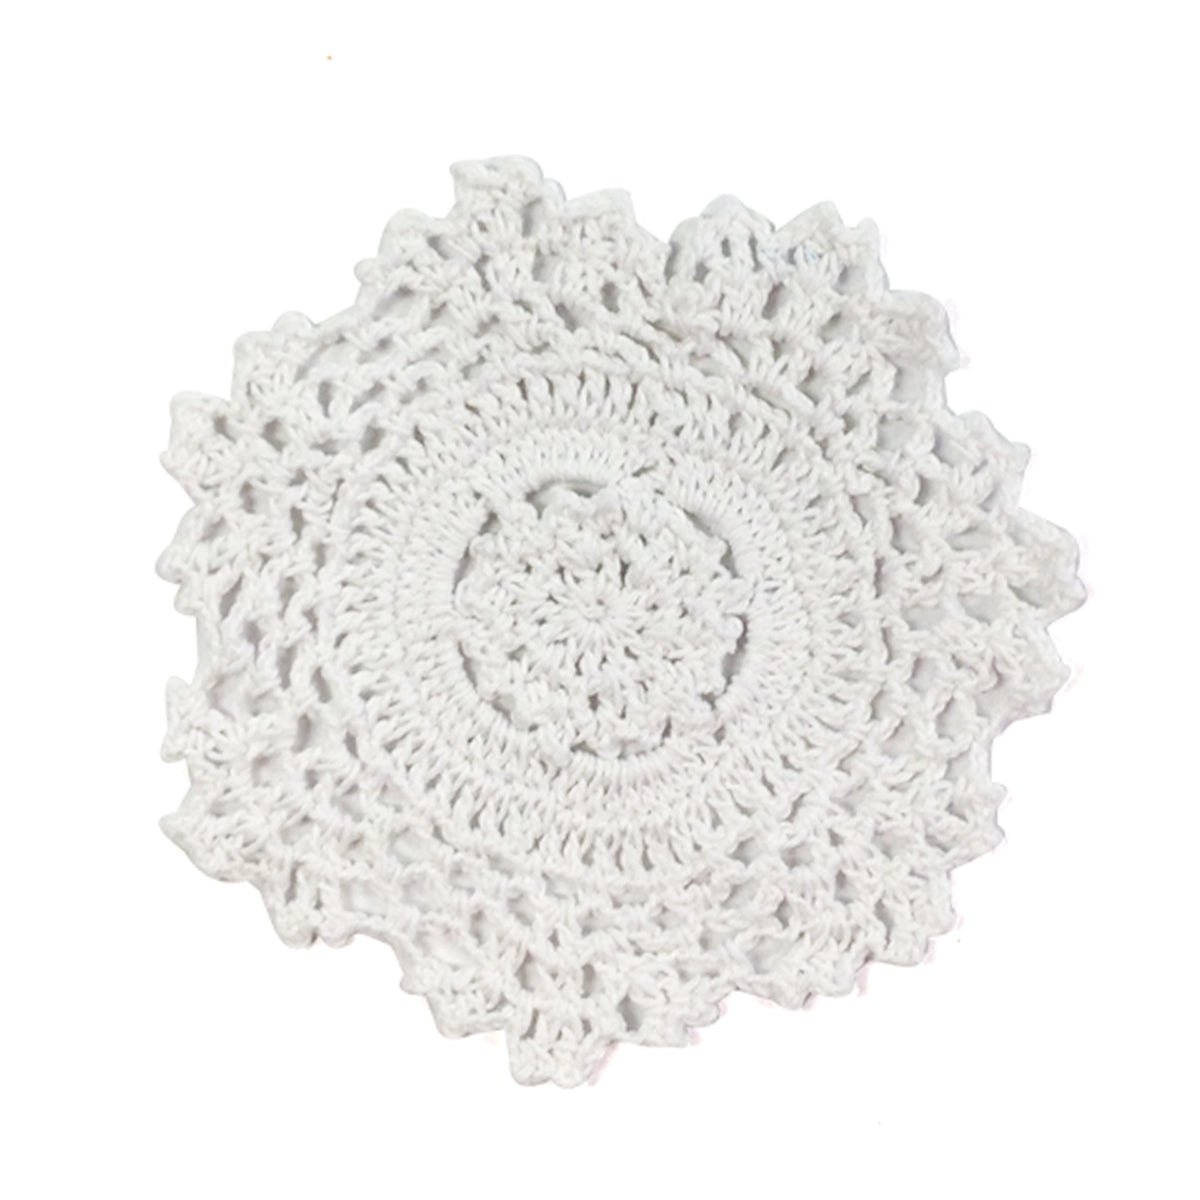 Wrapables Small White Round Crochet Cotton Doily Placemat, Set of 4